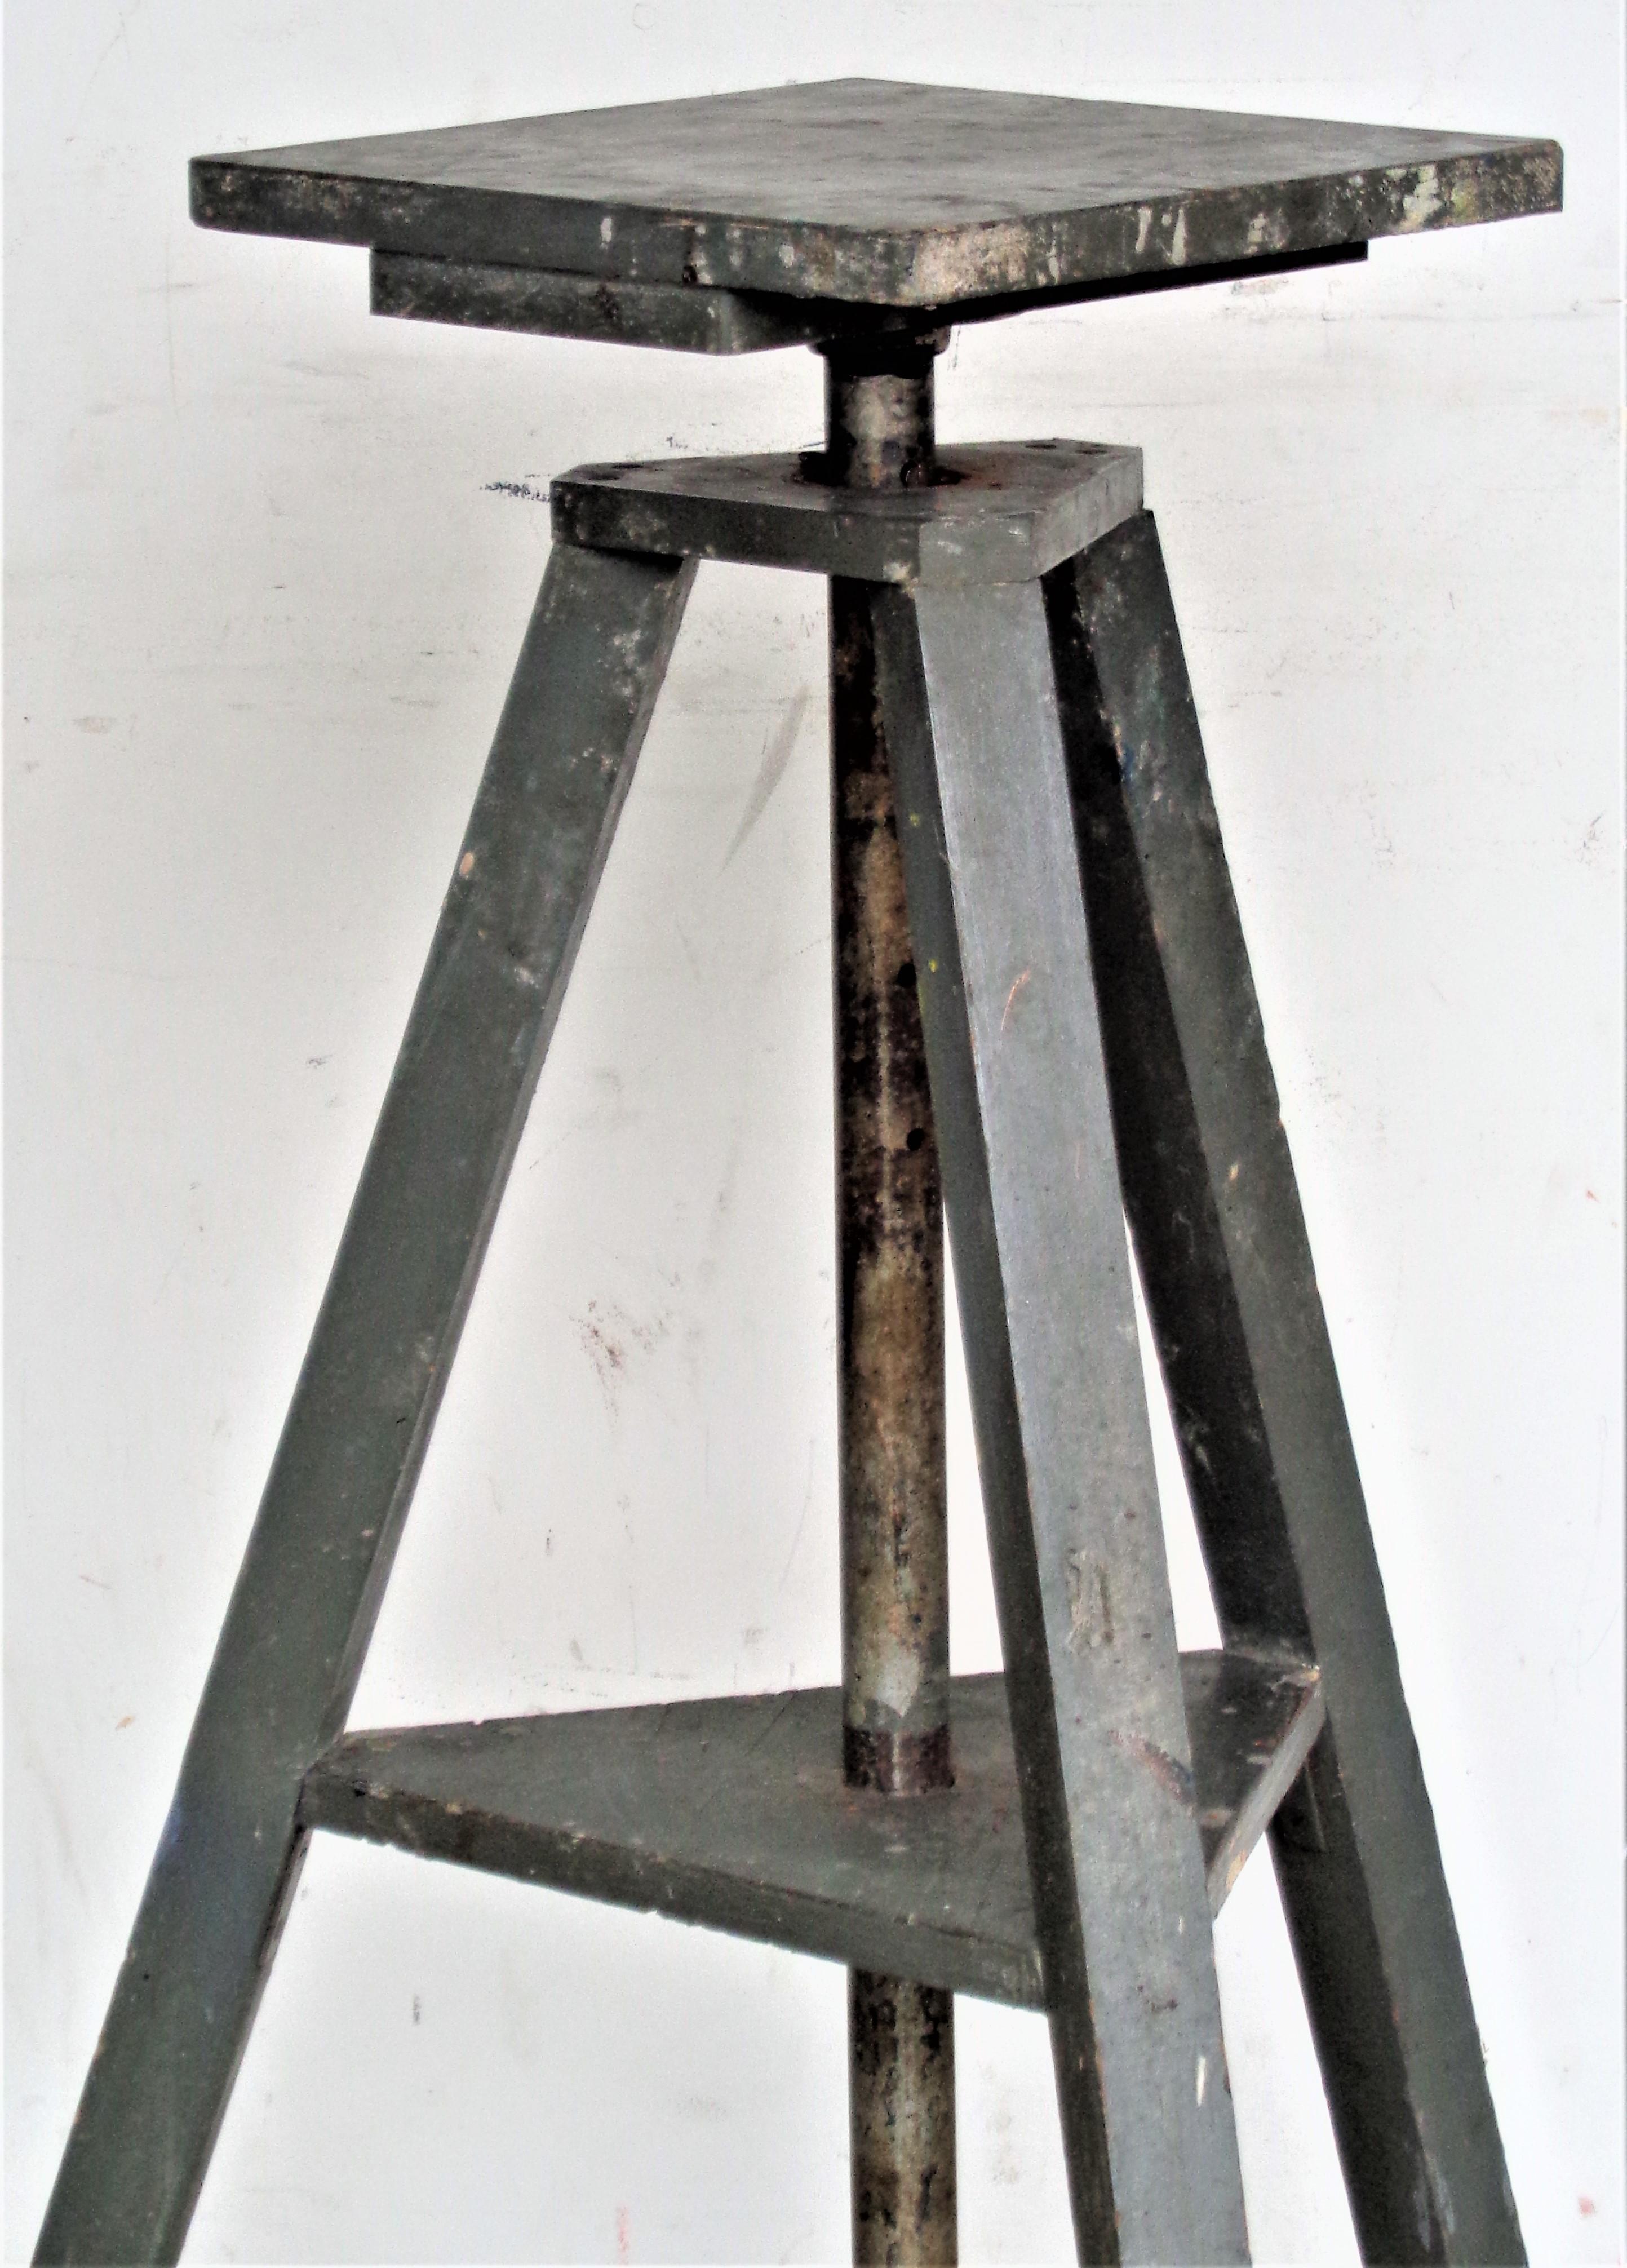 Antique wood tripod base sculptor artist modelling stand in original aged industrial gray painted surface with revolving top and six height adjustments. Tallest top height adjustment is 46 inches / lowest height is 37 inches. There are five two